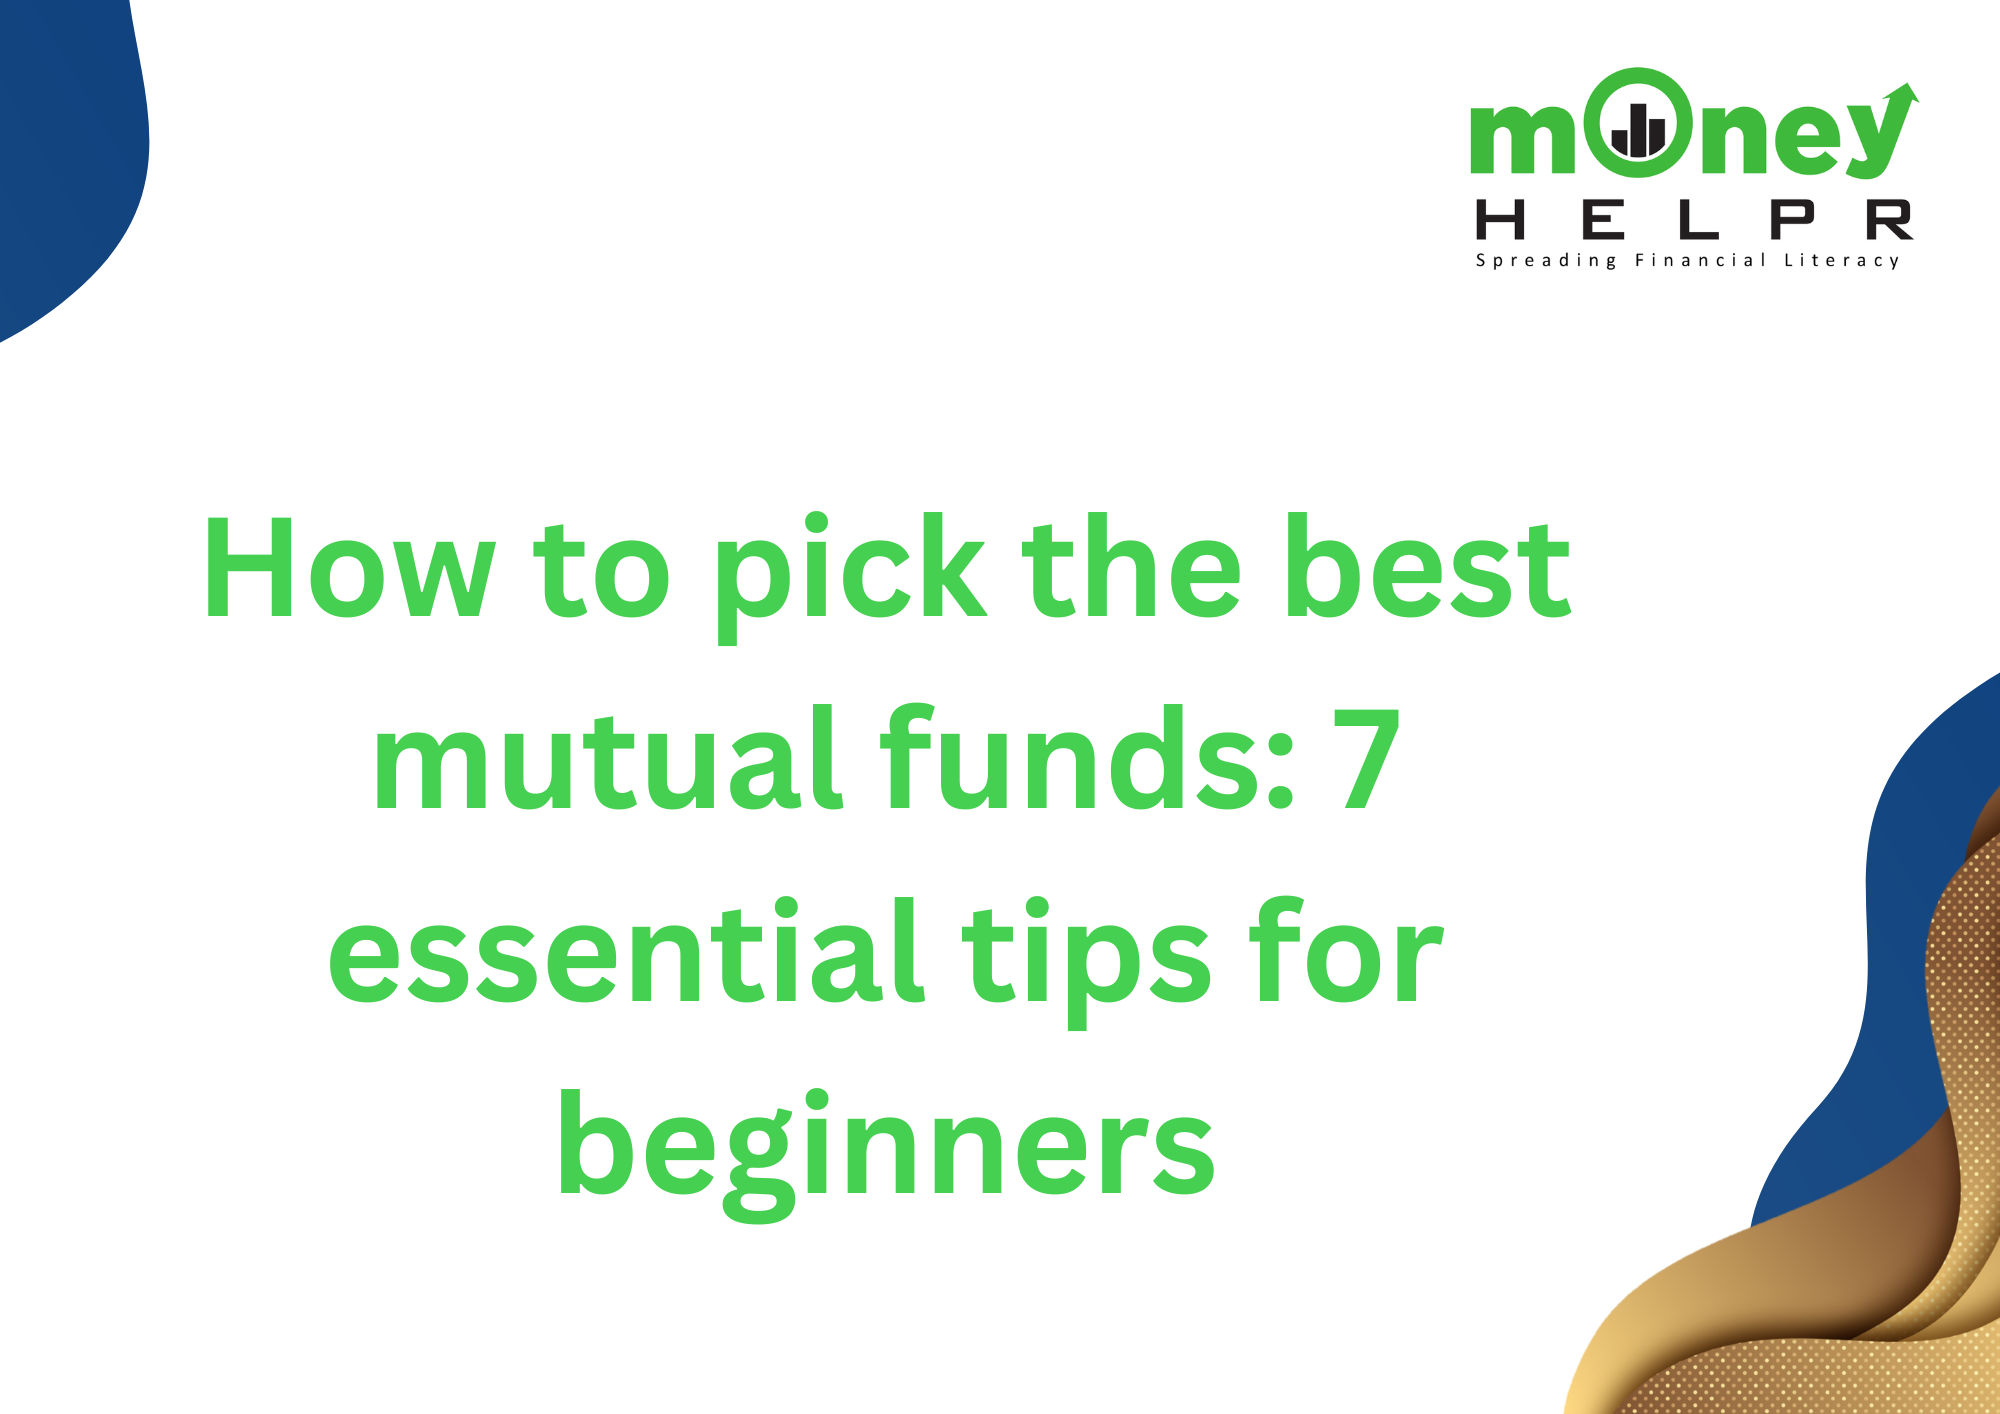 How to pick the best mutual funds: 7 tips for beginners